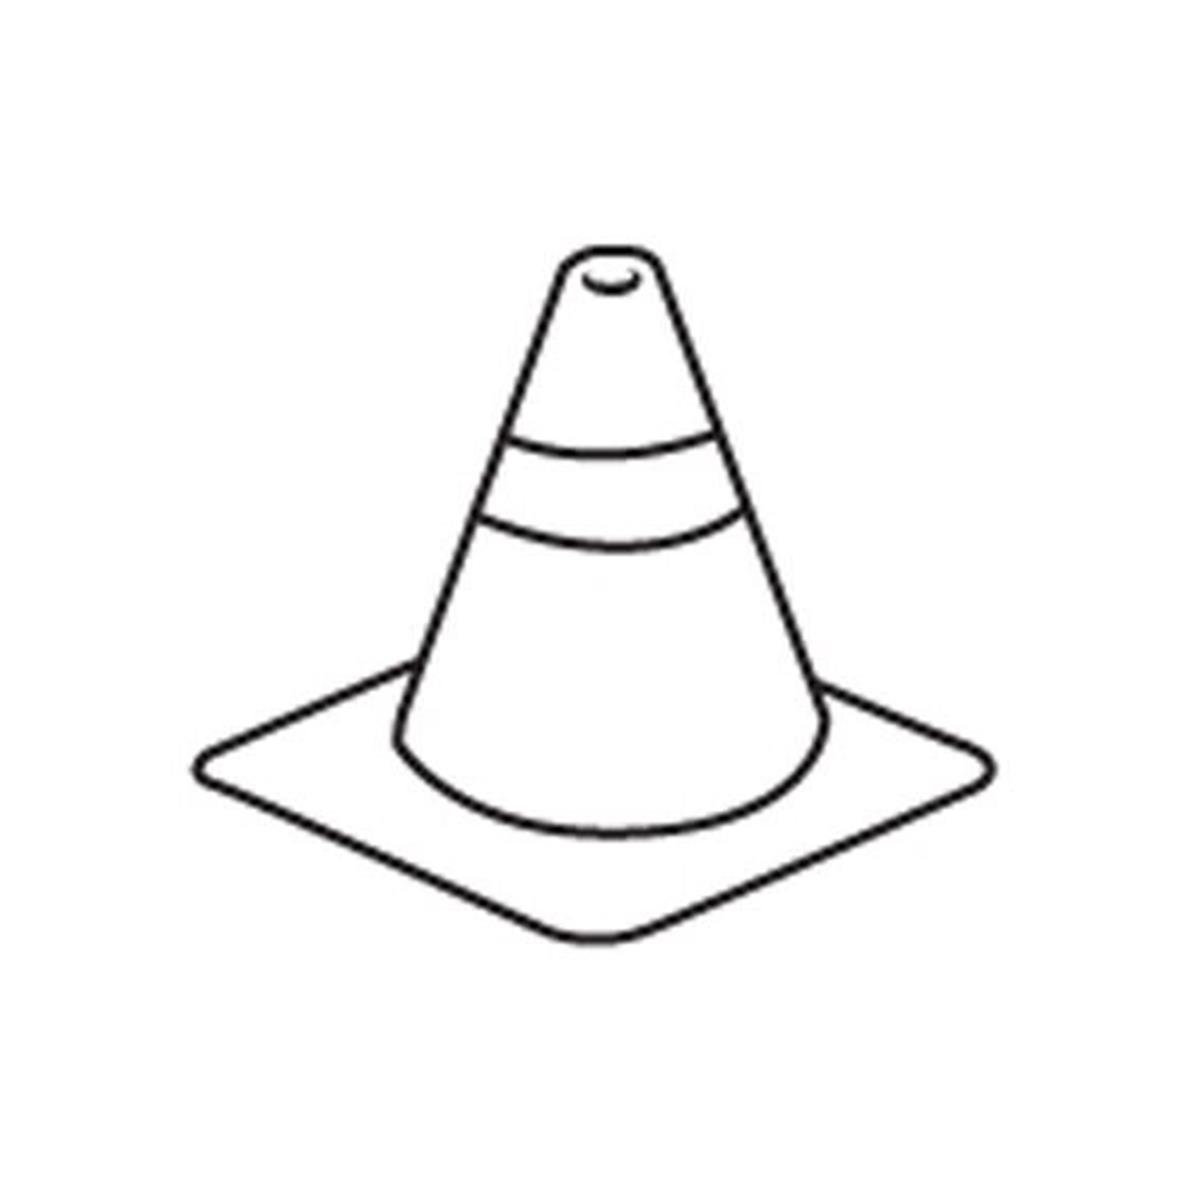 Se-0417 0.5 X 0.5 In. Incentive Stamp - Construction Cone